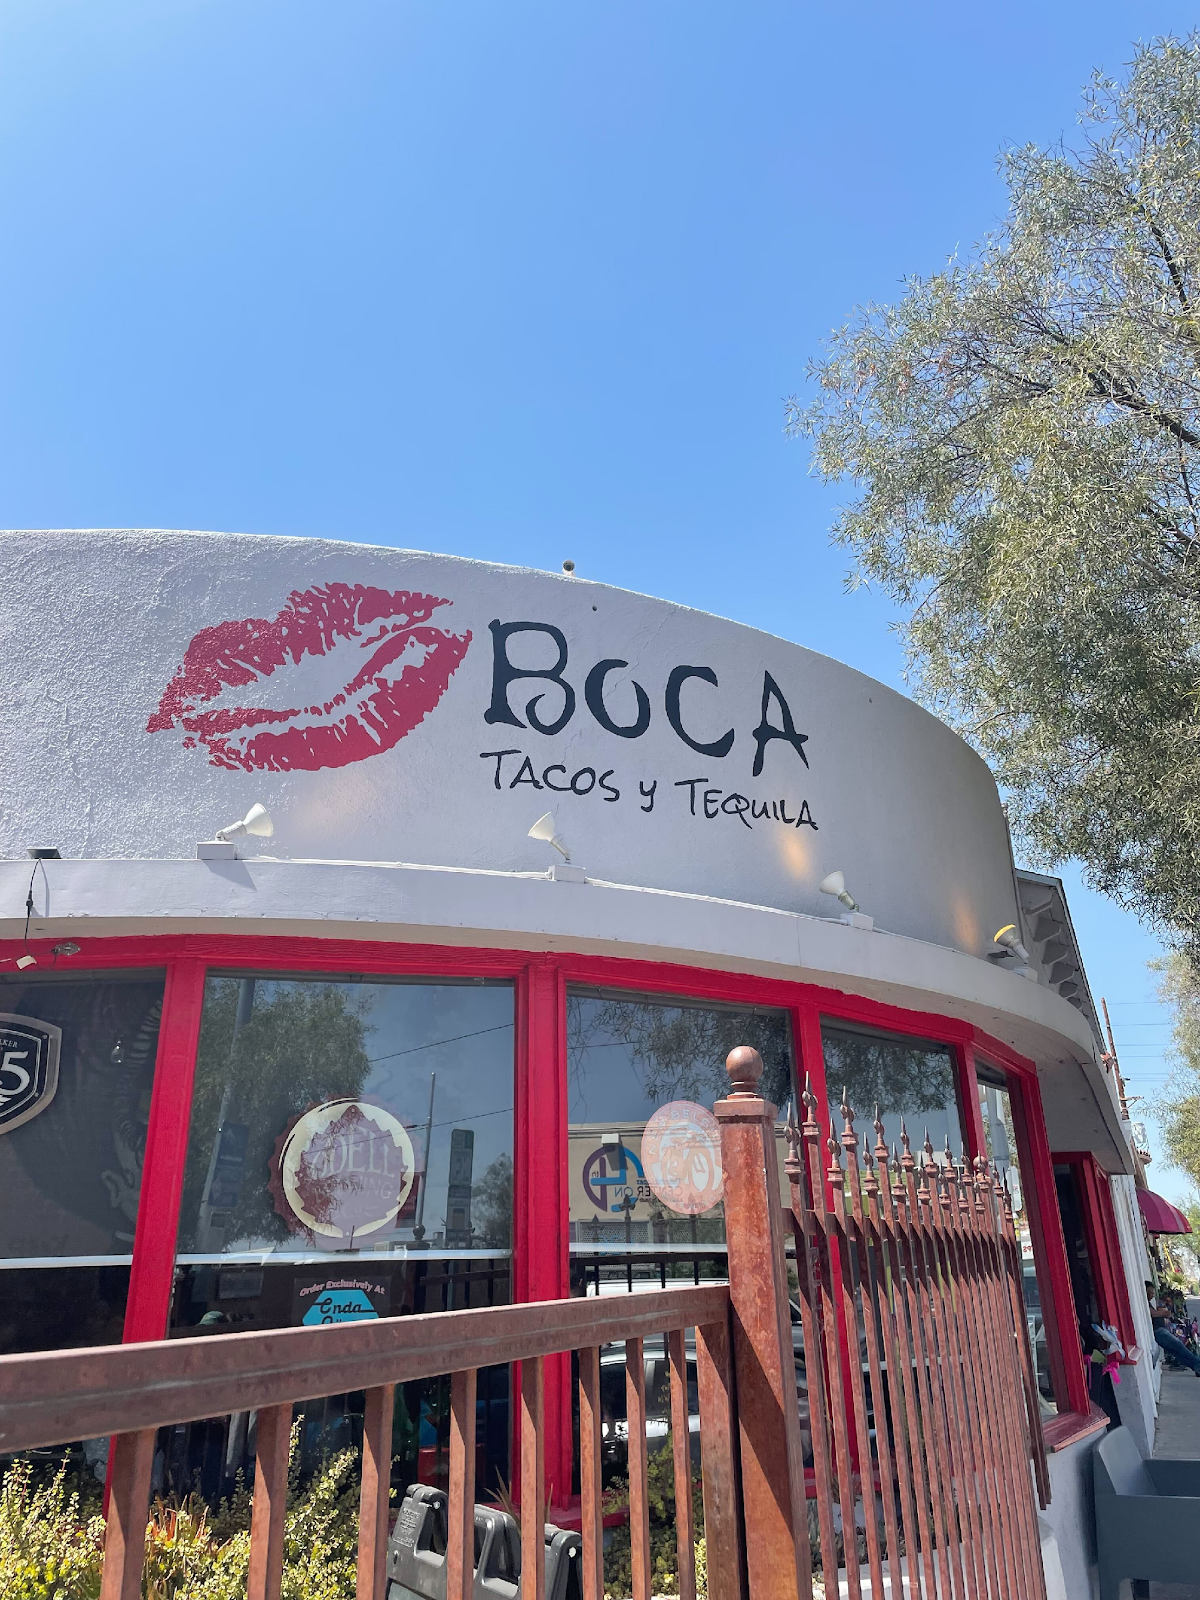 BOCA Tacos Y Tequila is home to local flavors and an award winning chef.